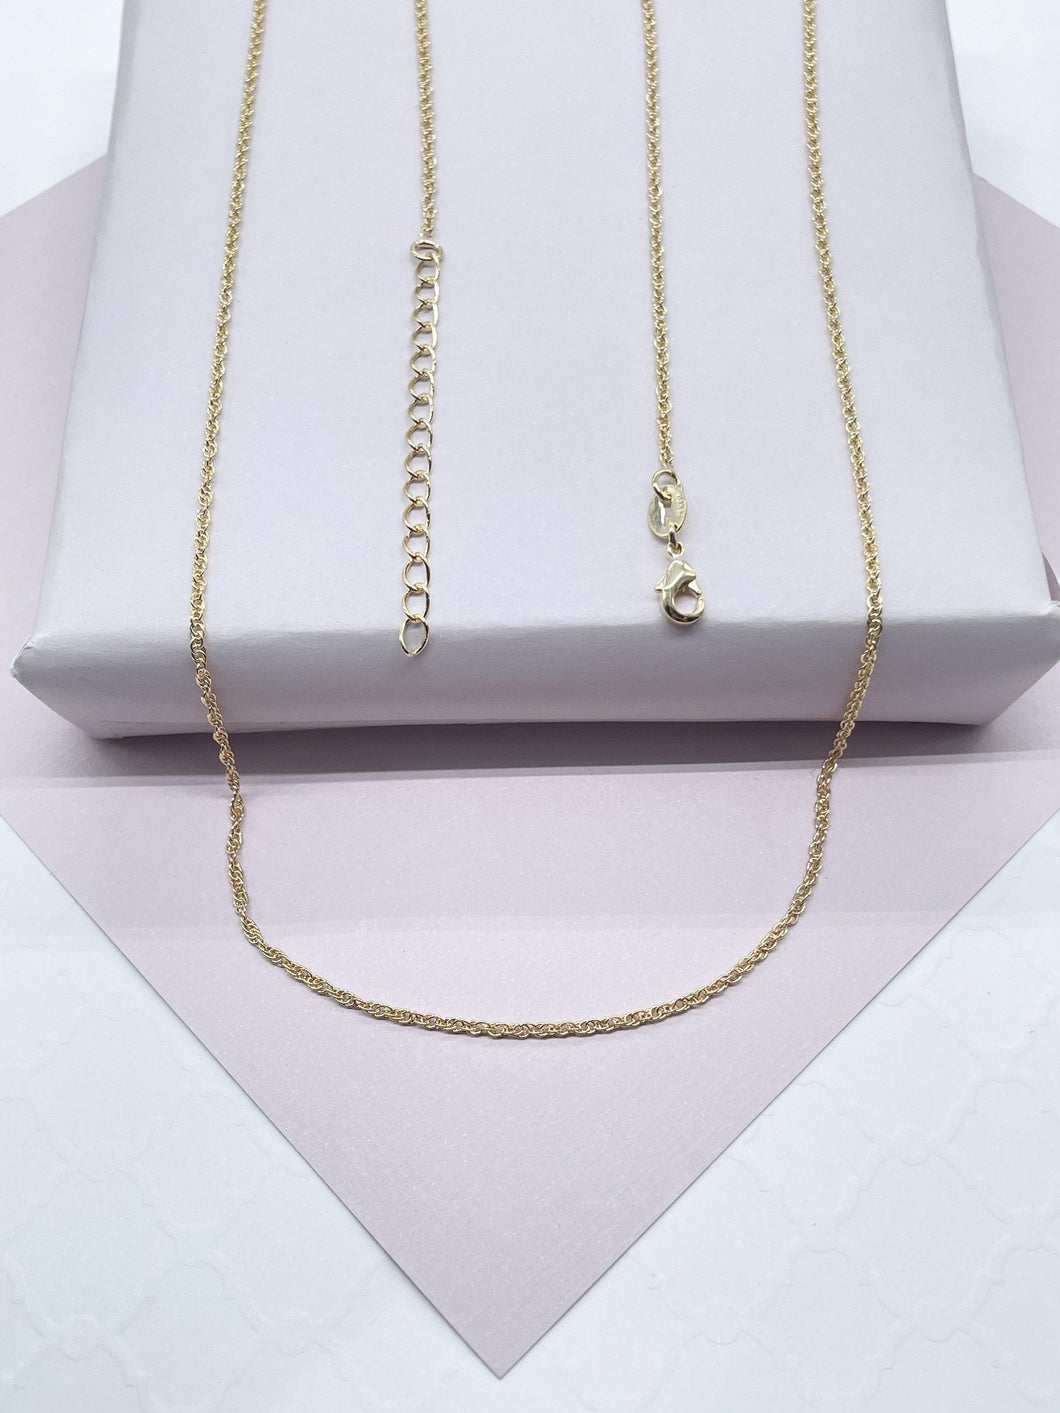 18k Gold Filled 1mm Wheat Chain Available In Sizes 16” , 18”, 20”, 22” & 24” For